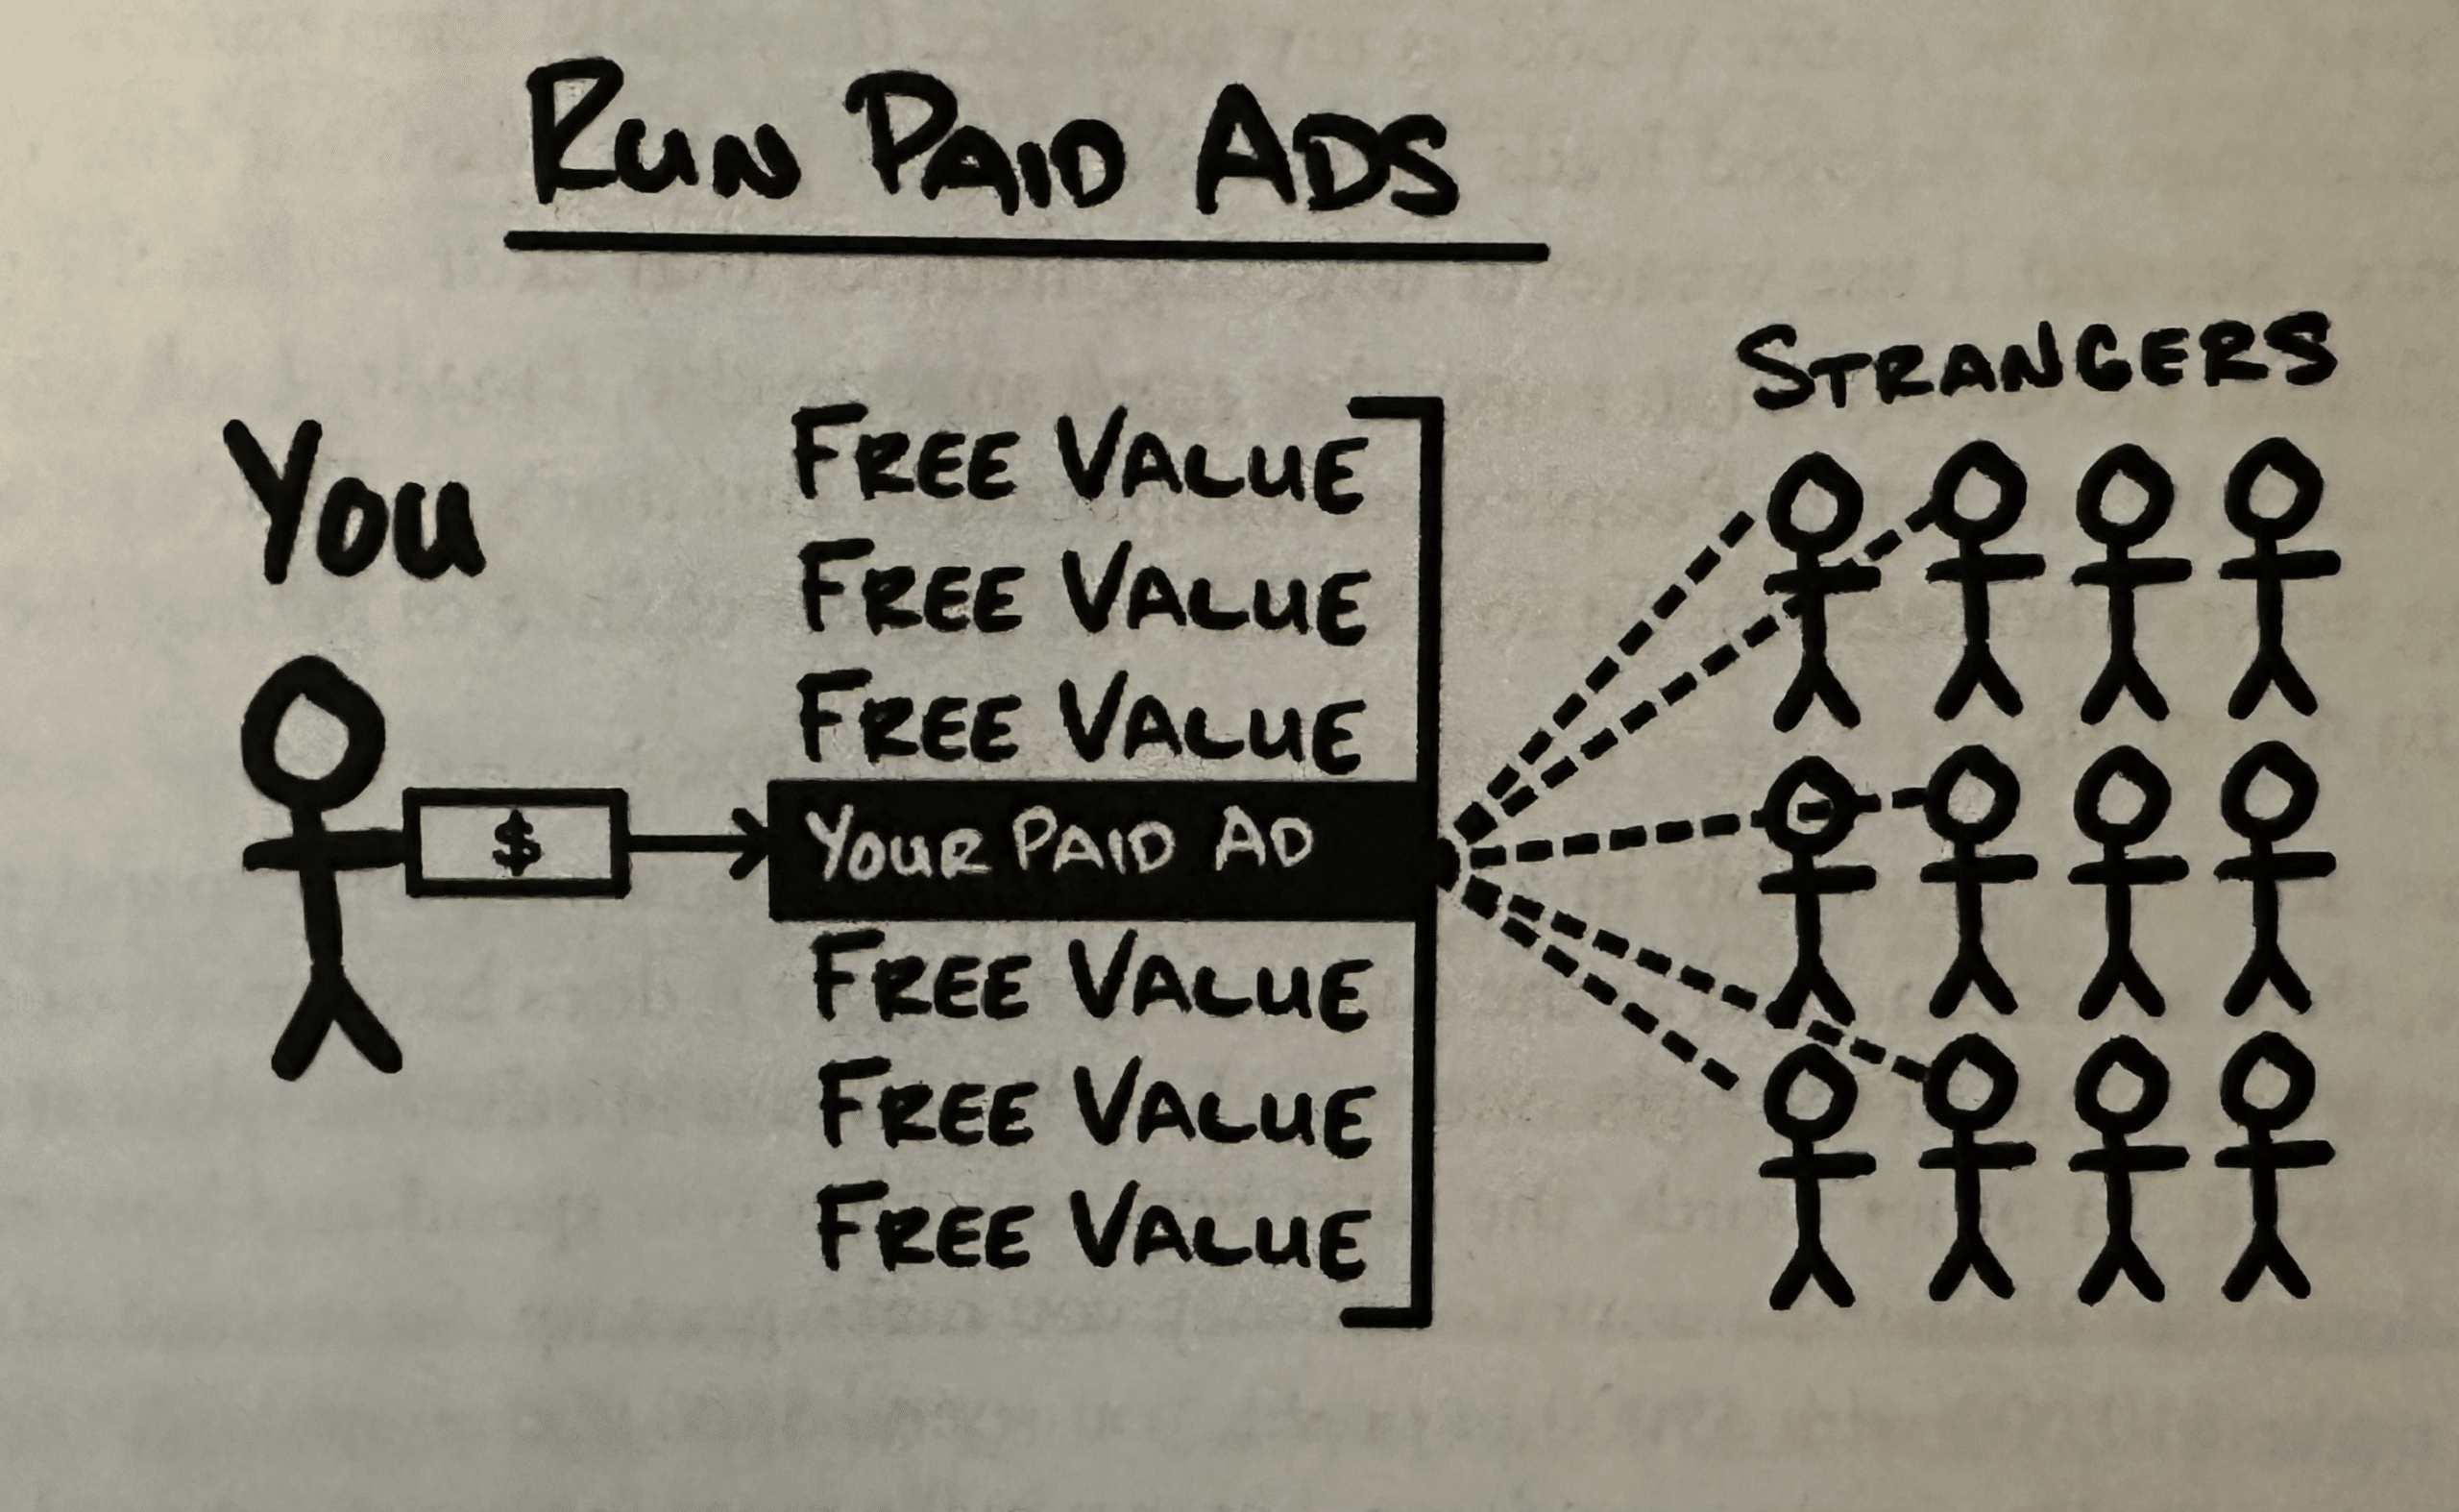 $100M Leads - How Paid Ads Work